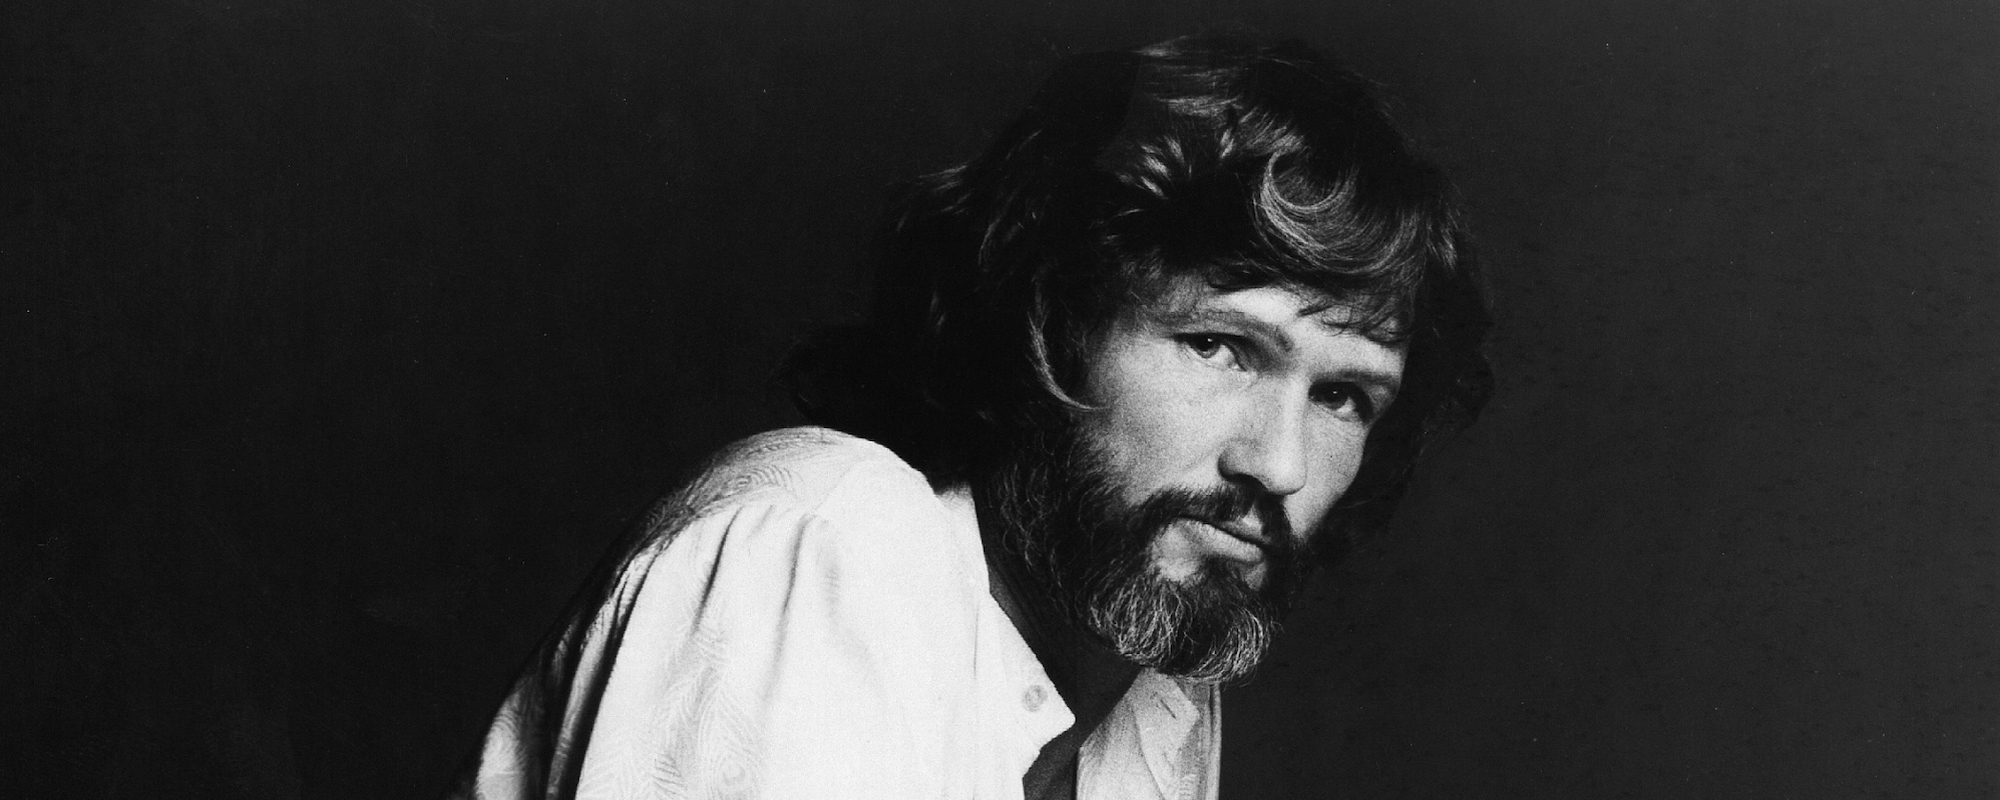 Kris Kristofferson Recorded “Anthem ’84” with The Borderlords Before Bringing it to The Highwaymen